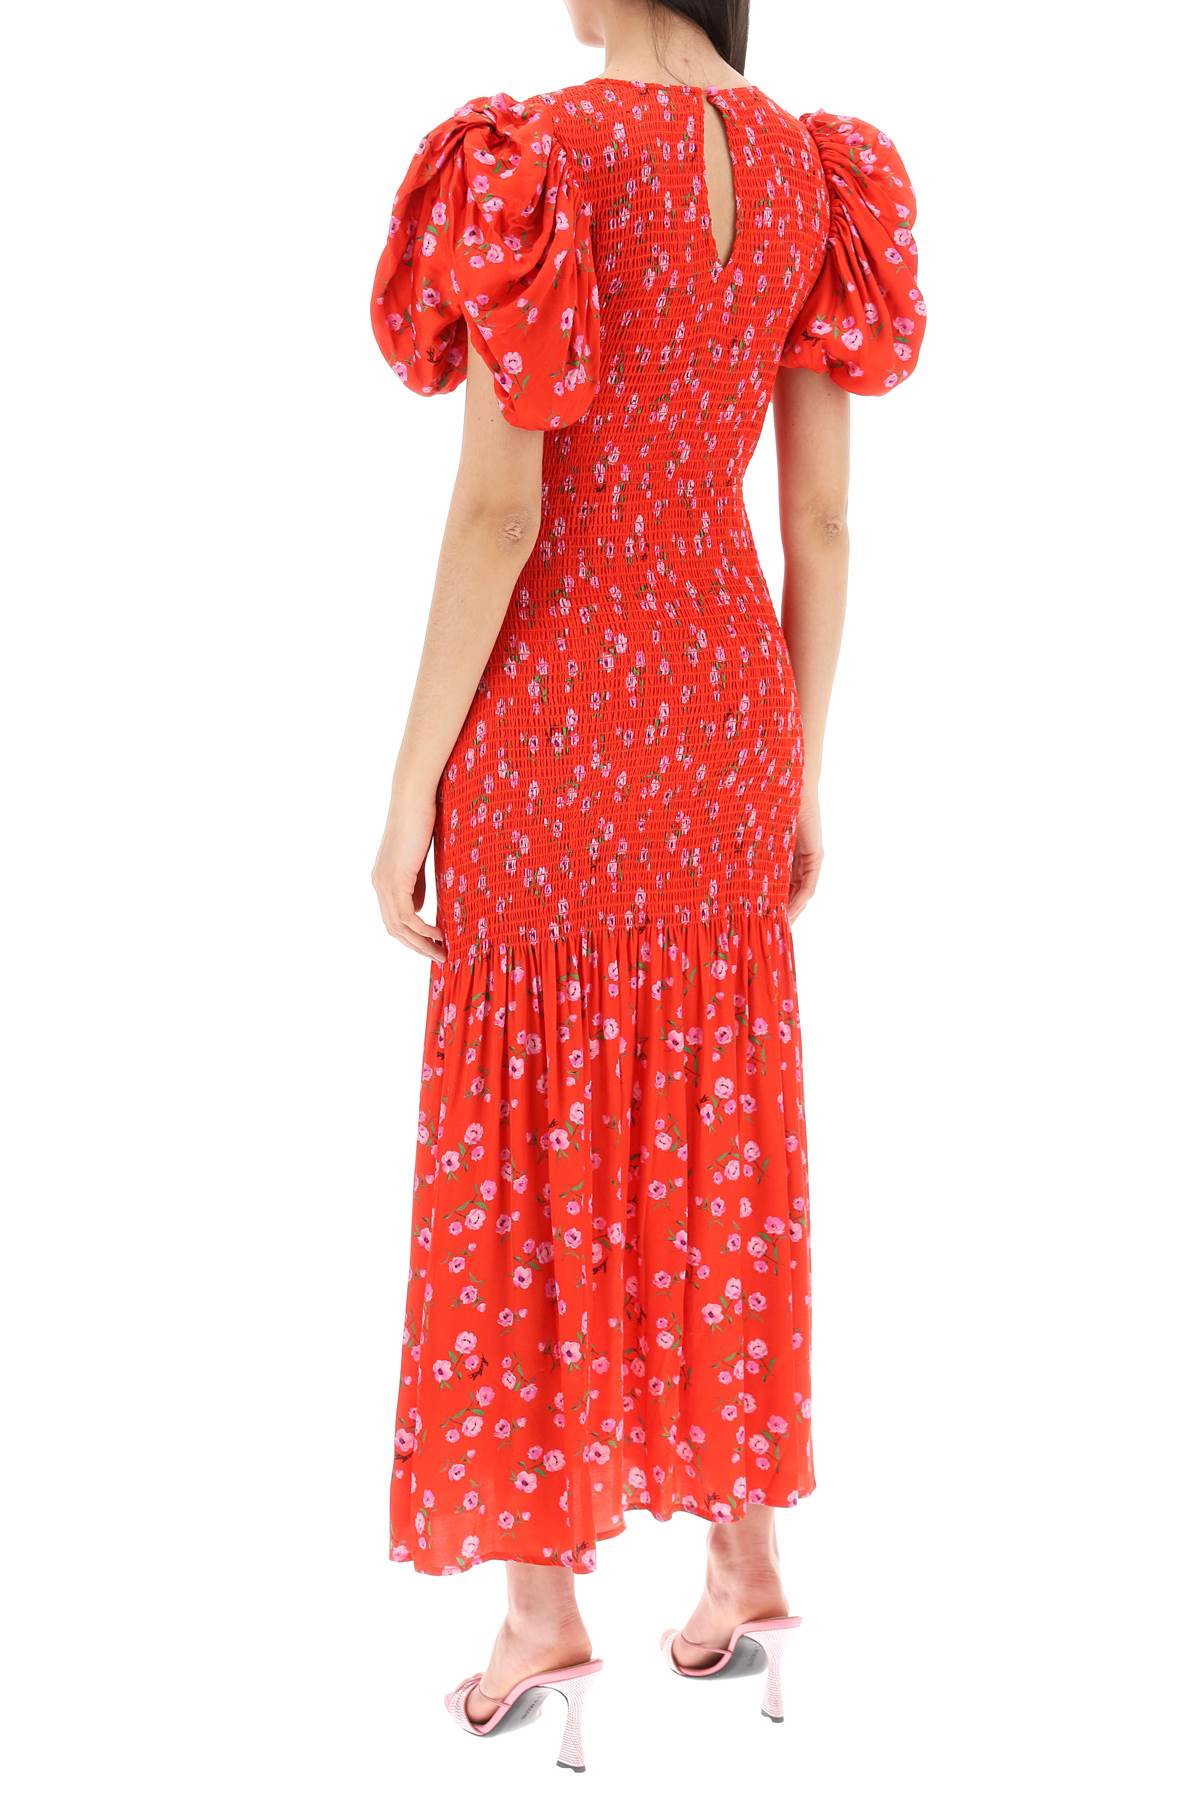 Rotate Floral Printed Maxi Dress With Puffed Sleeves In Satin Fabric-women > clothing > dresses > maxi-Rotate-36-Red-Urbanheer